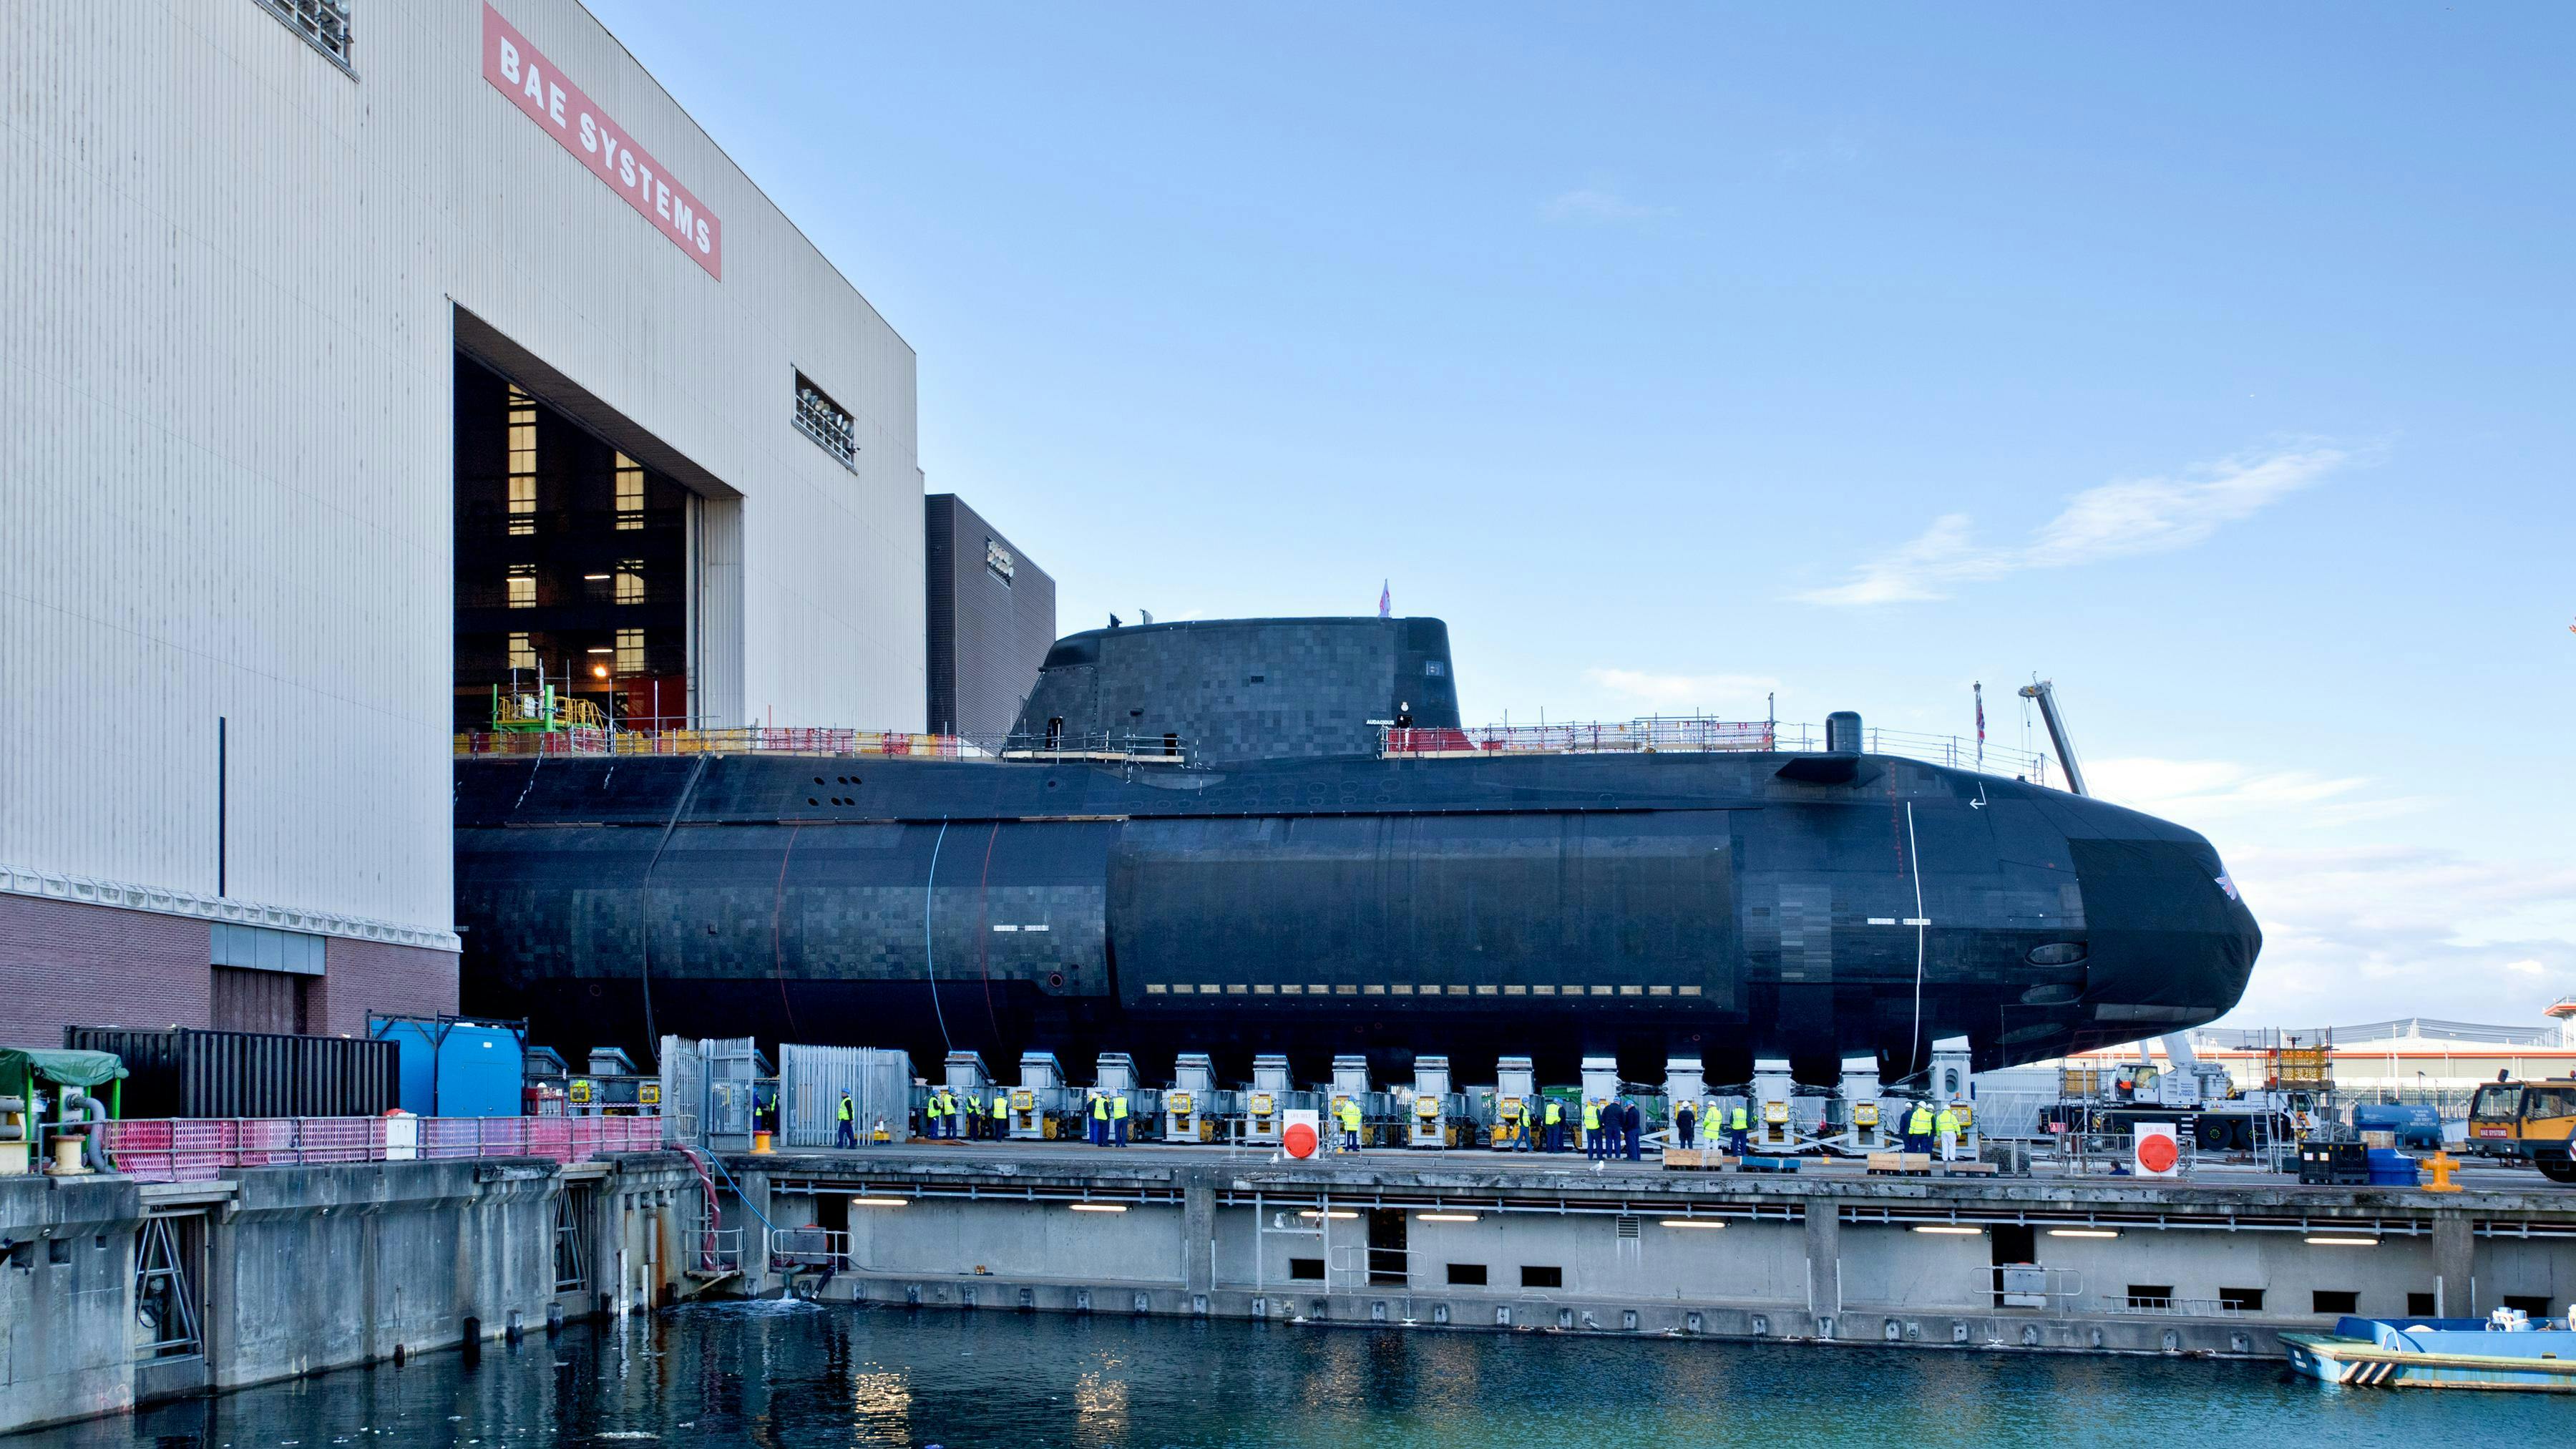 Updated Bomb Reported On Nuclear Submarine At Barrow Found To Be Hoax